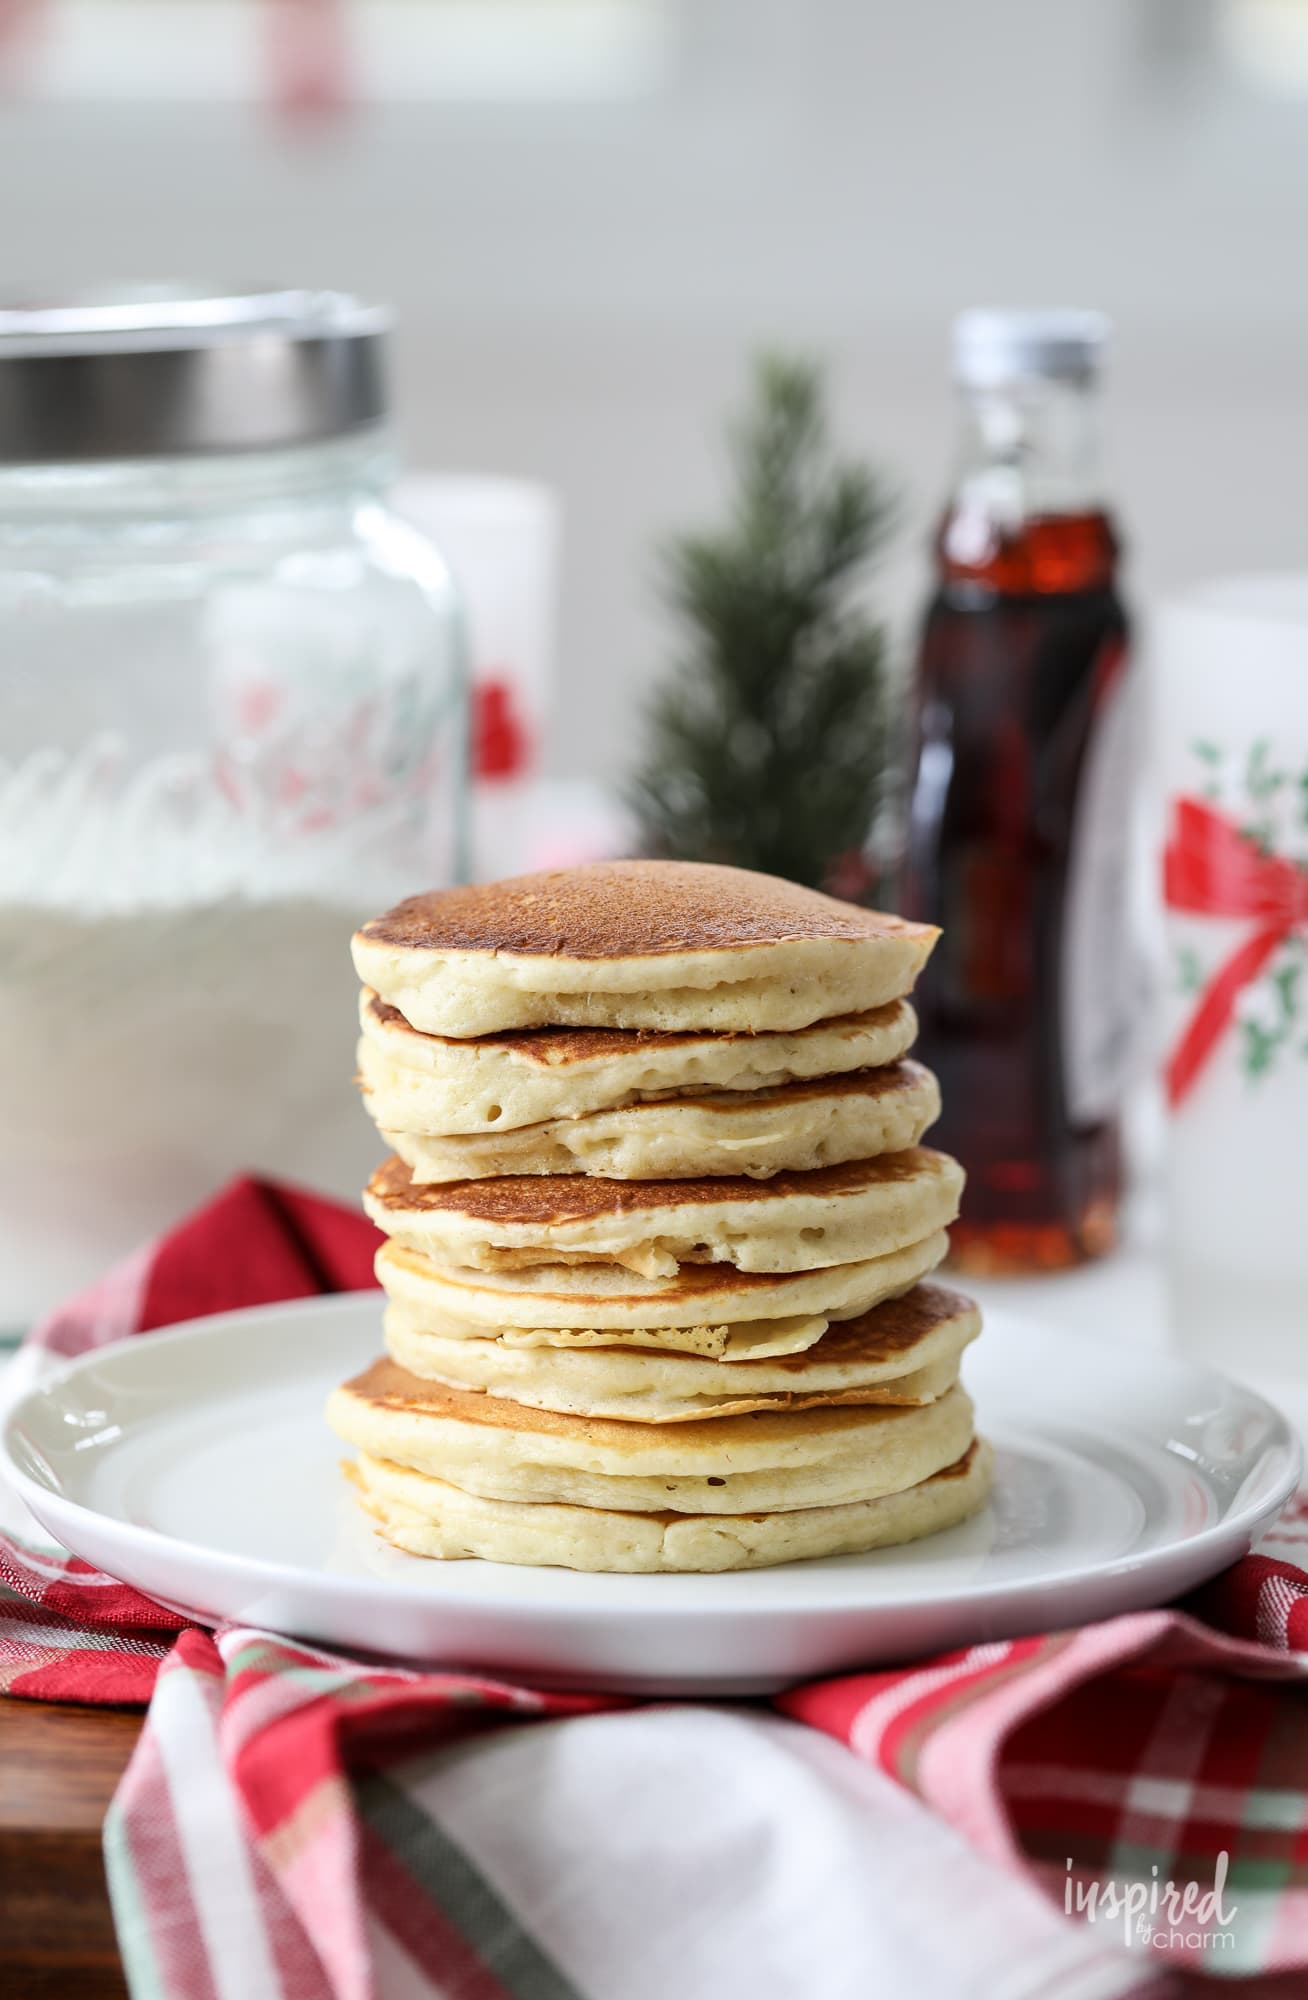 Learn how to make this easy and delicious Homemade Pancake Mix. #homemade #pancake #mix #breakfast #recipe #pancakes